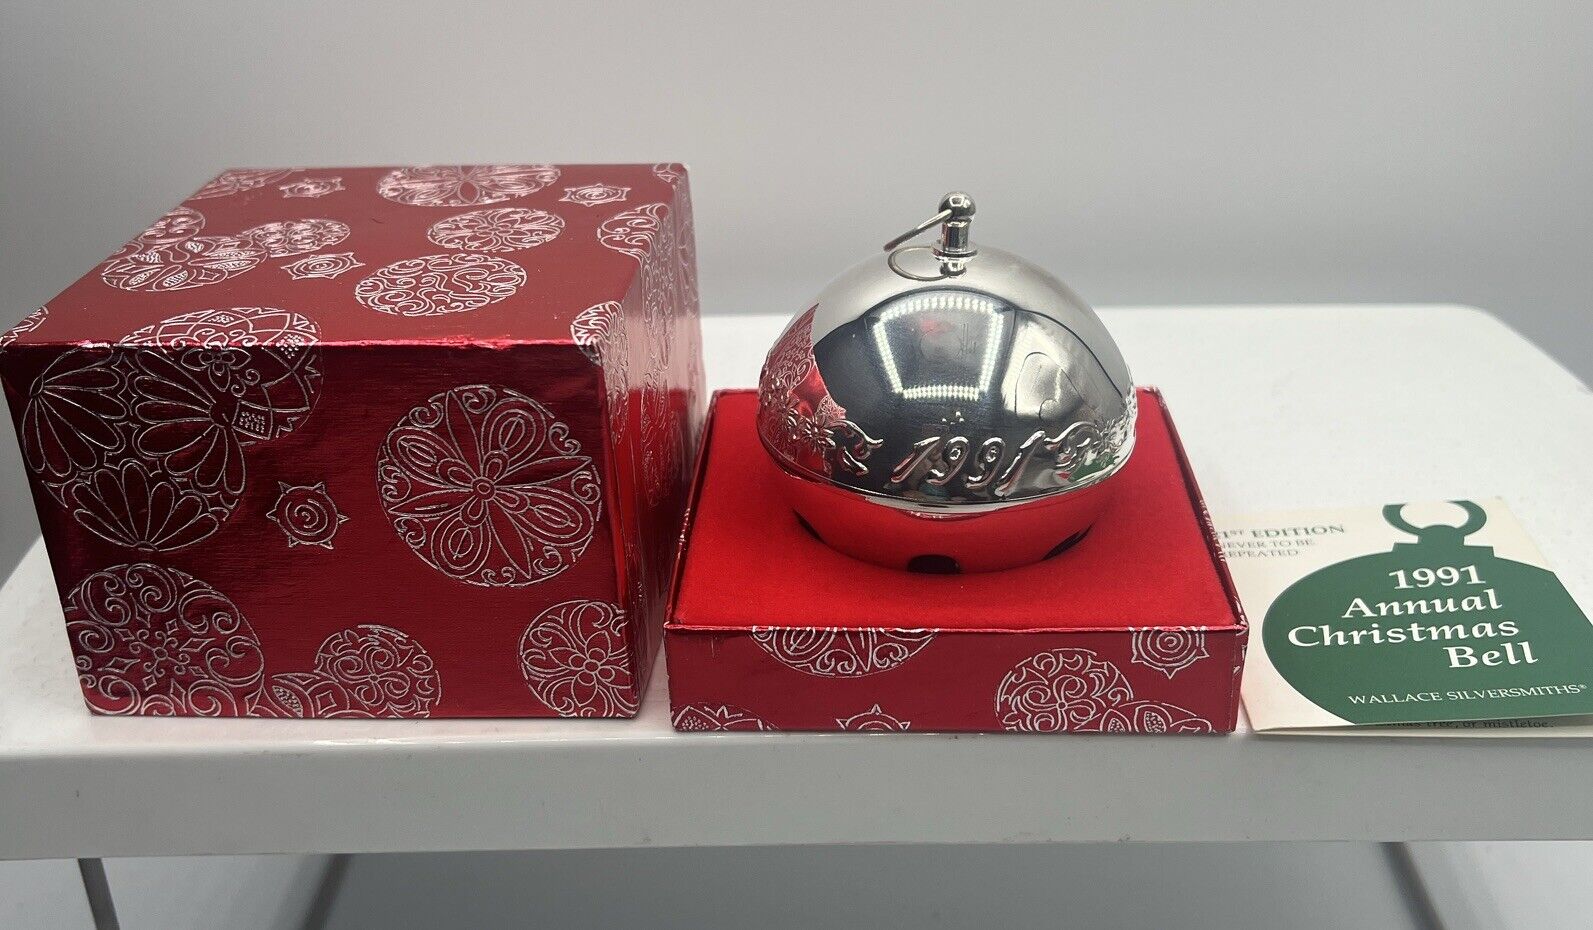 Wallace Silversmiths Limited Edition 1991 Vintage Christmas Sleigh Bell